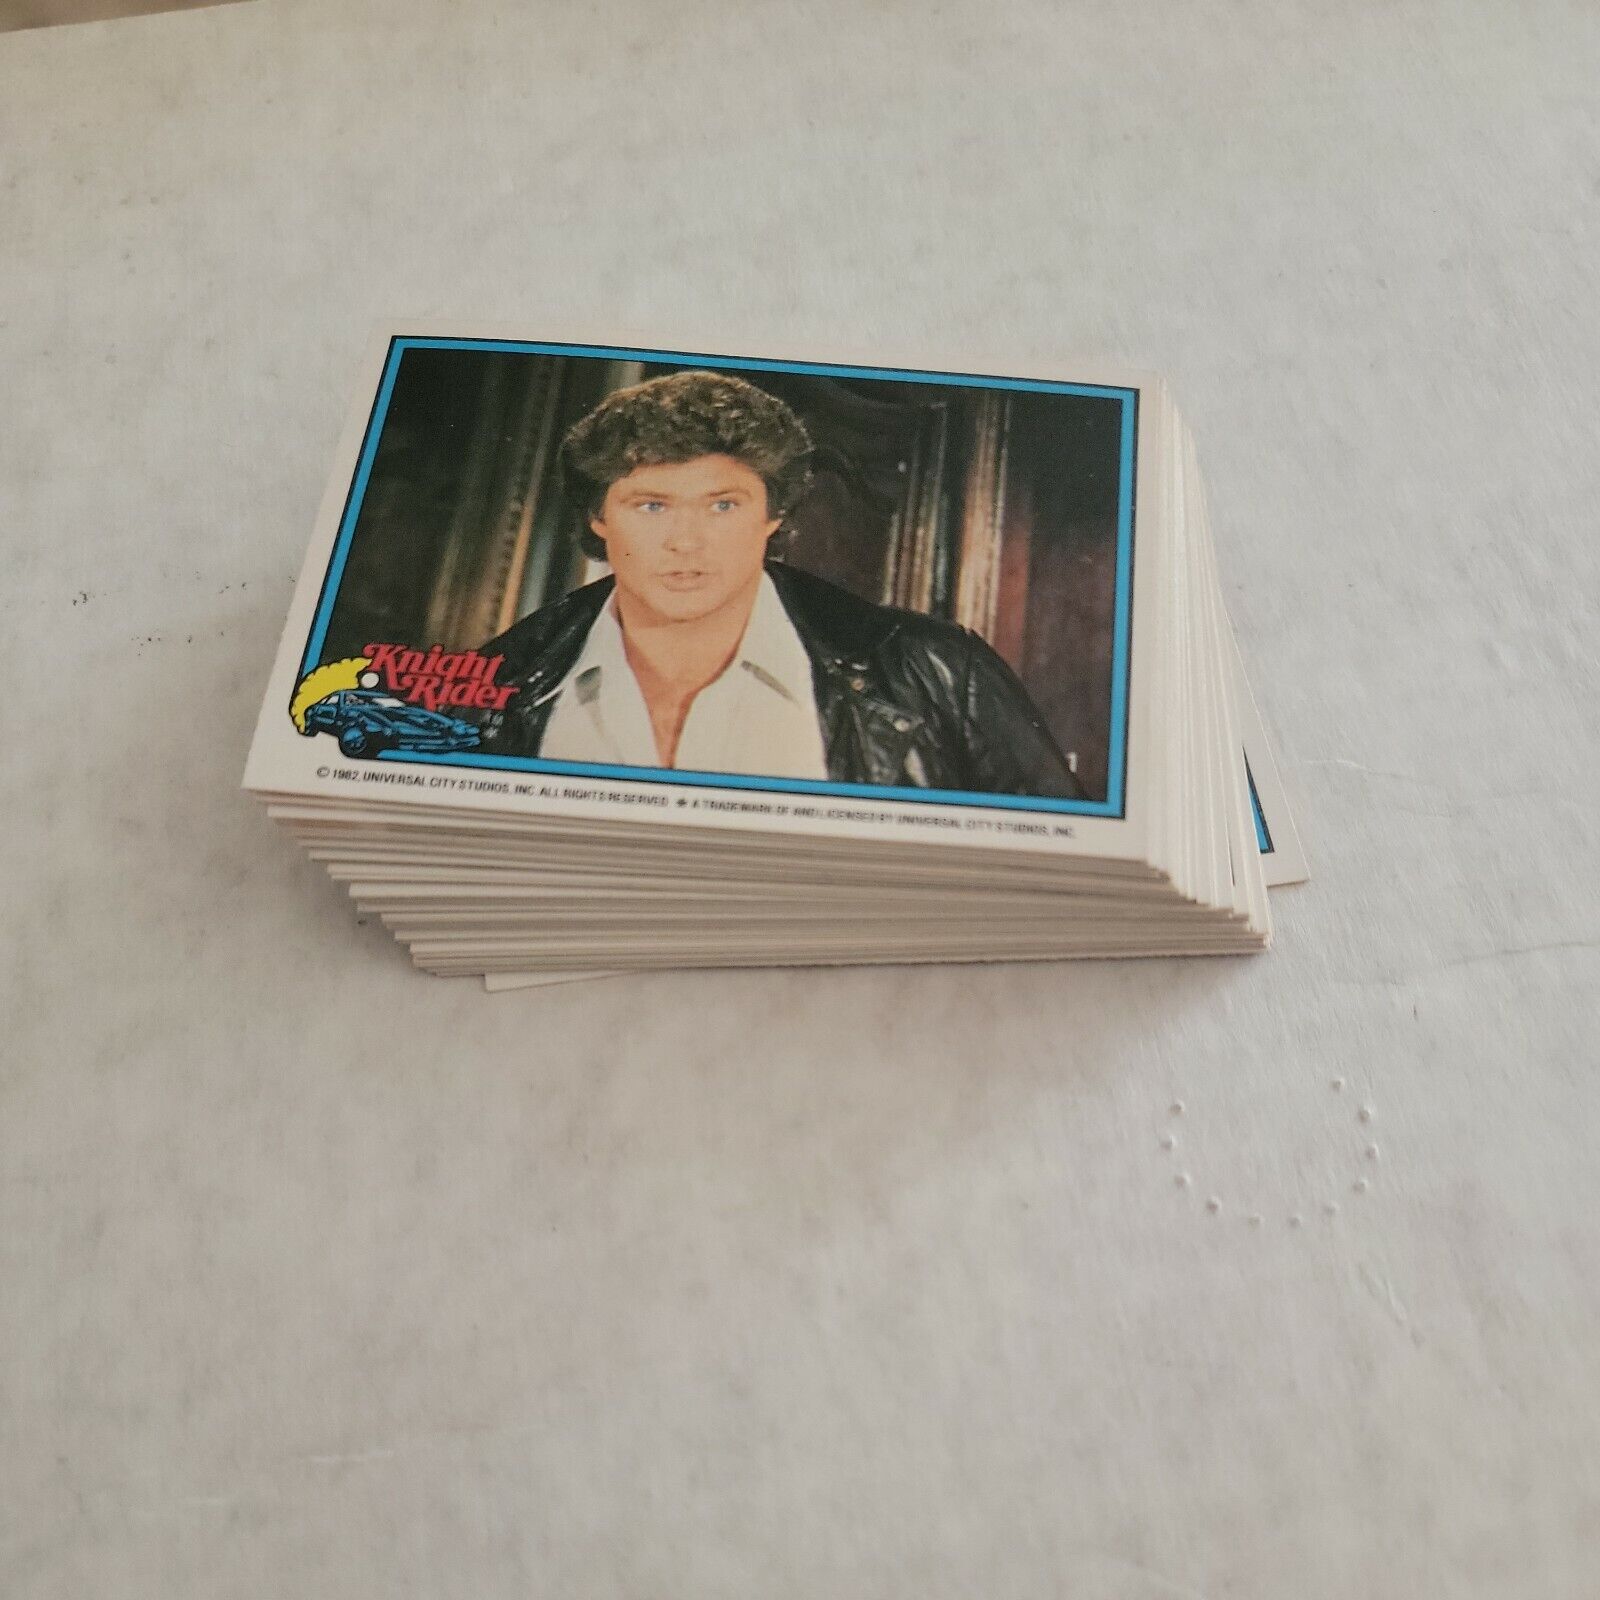 Vintage 1982 Knight Rider Complete Donruss Card Set 1-55 and 11 Variant Cards 66